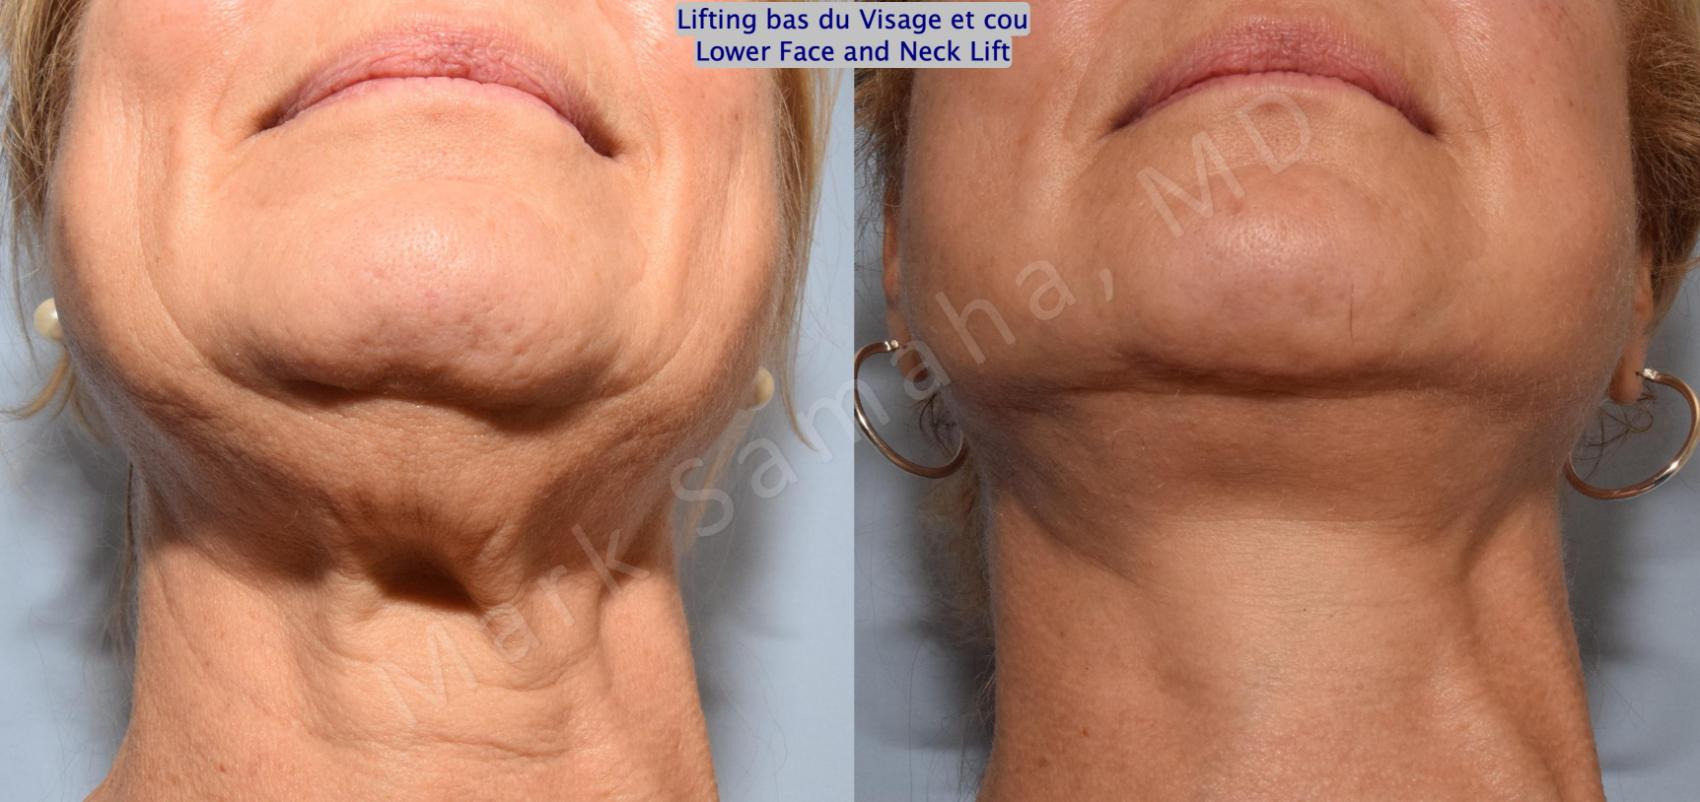 Before & After Lifting du visage / Cou - Facelift / Necklift Case 164 Neck Cou View in Montreal, QC